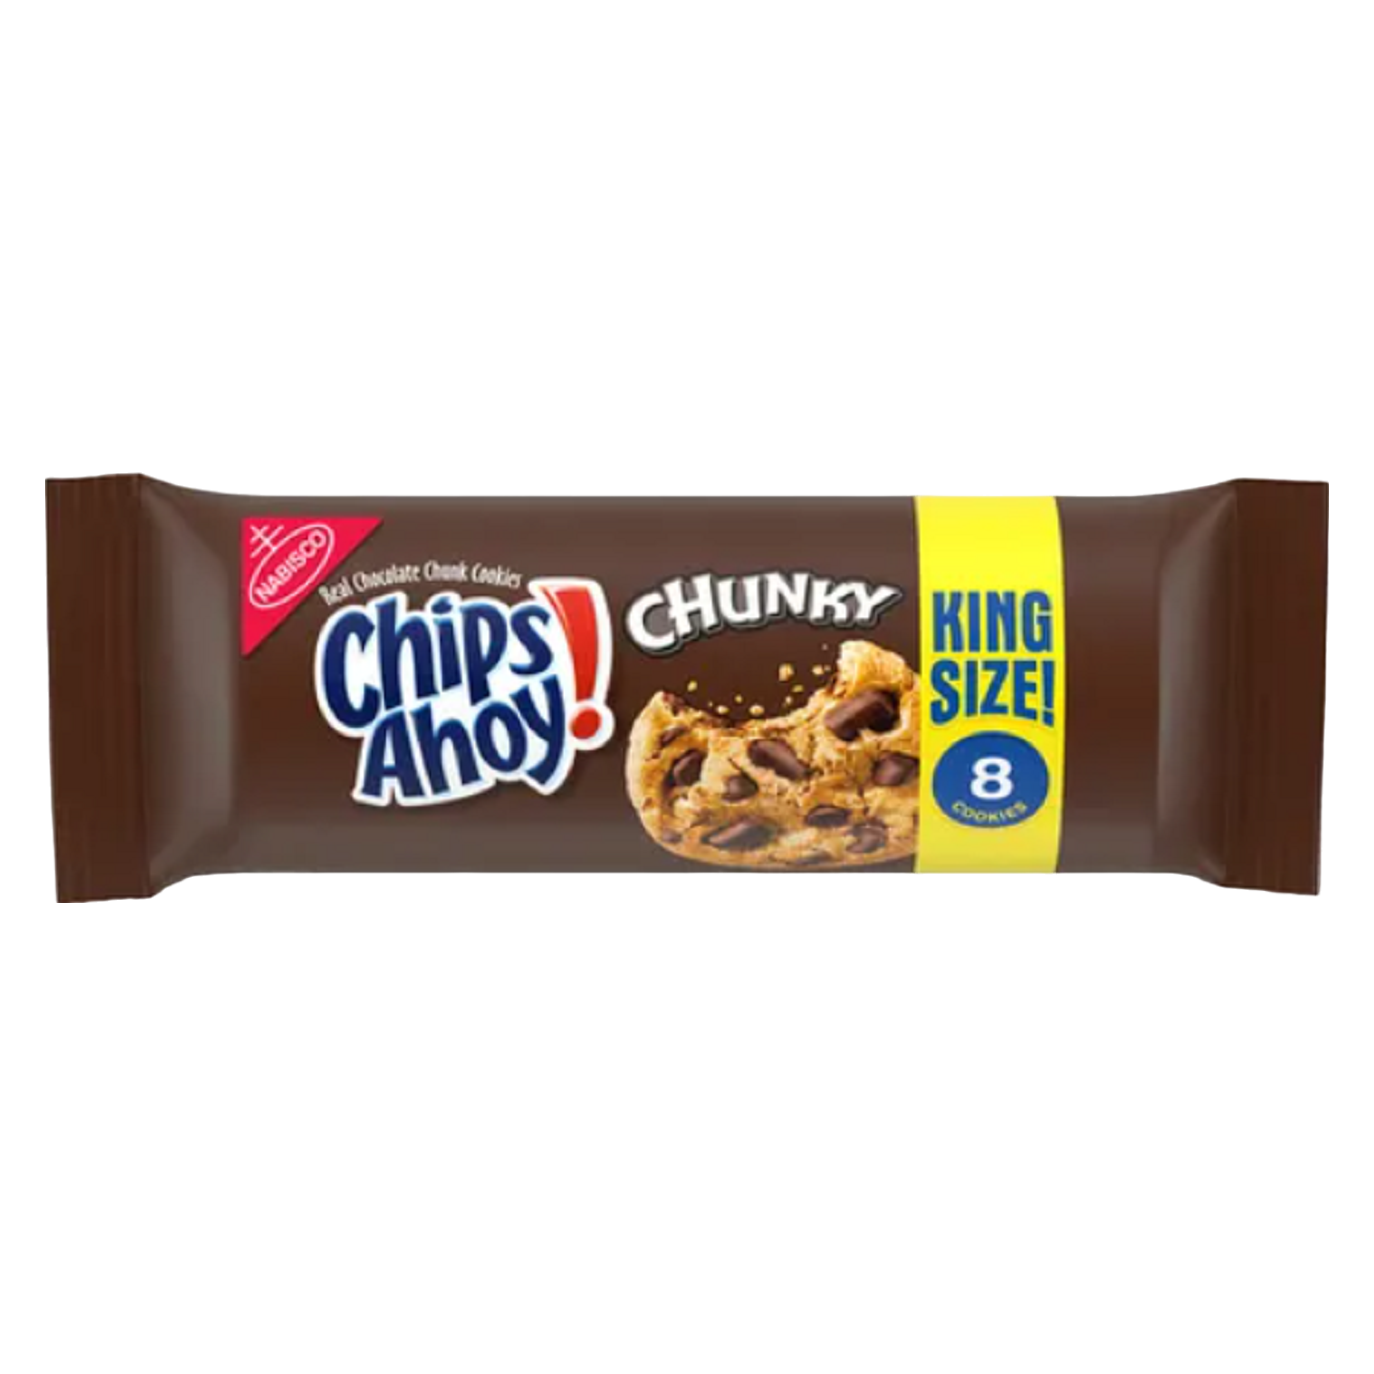 Chips Ahoy! Chunky Chocolate Chip Cookies King Size, 4.15oz